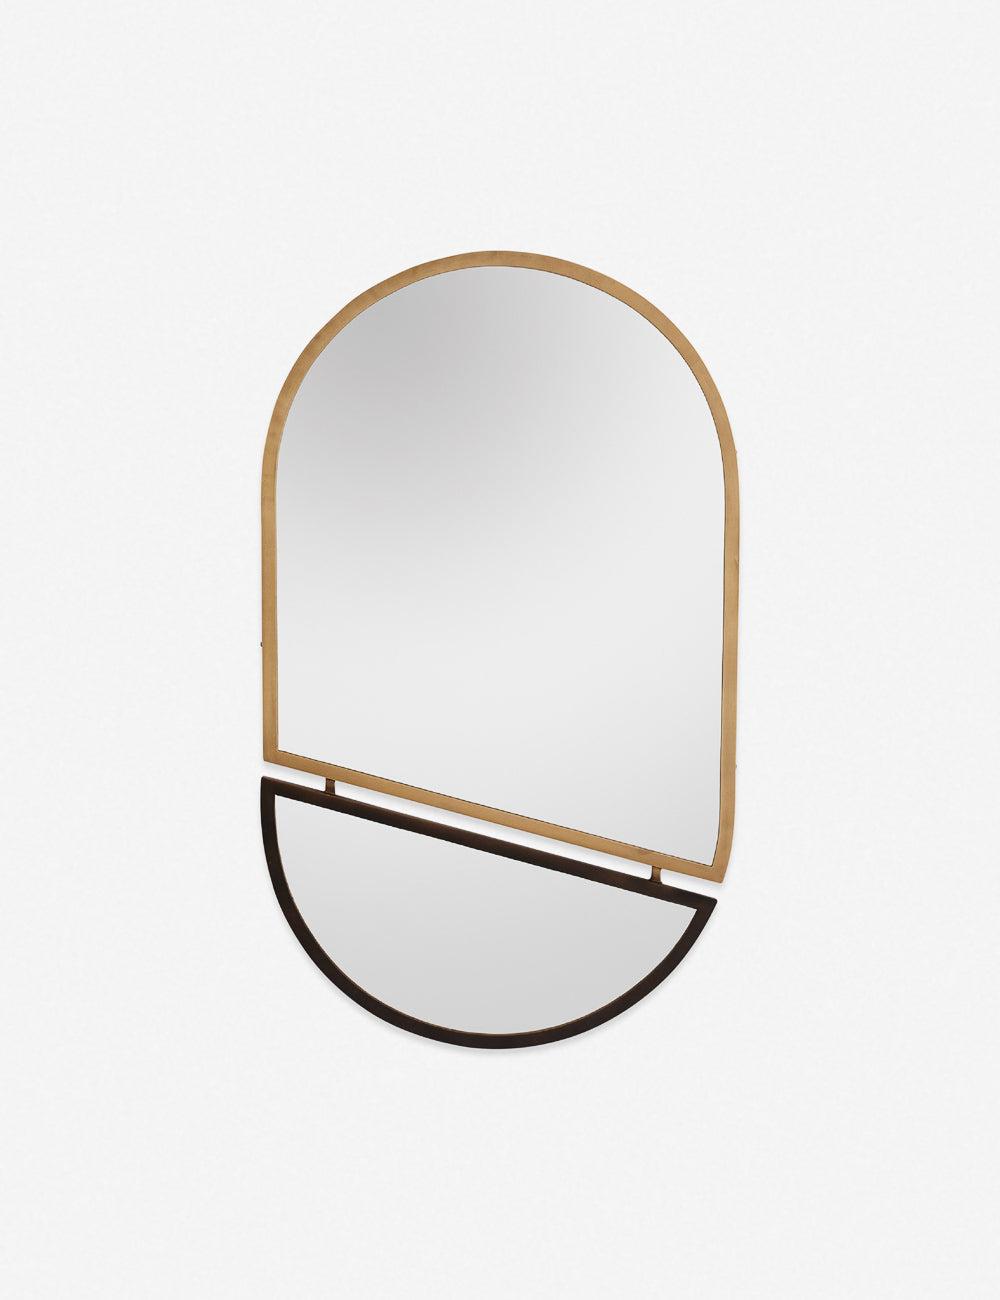 Bauhaus Inspired Split Oval Mirror in Bronze and Gold, 40x24"